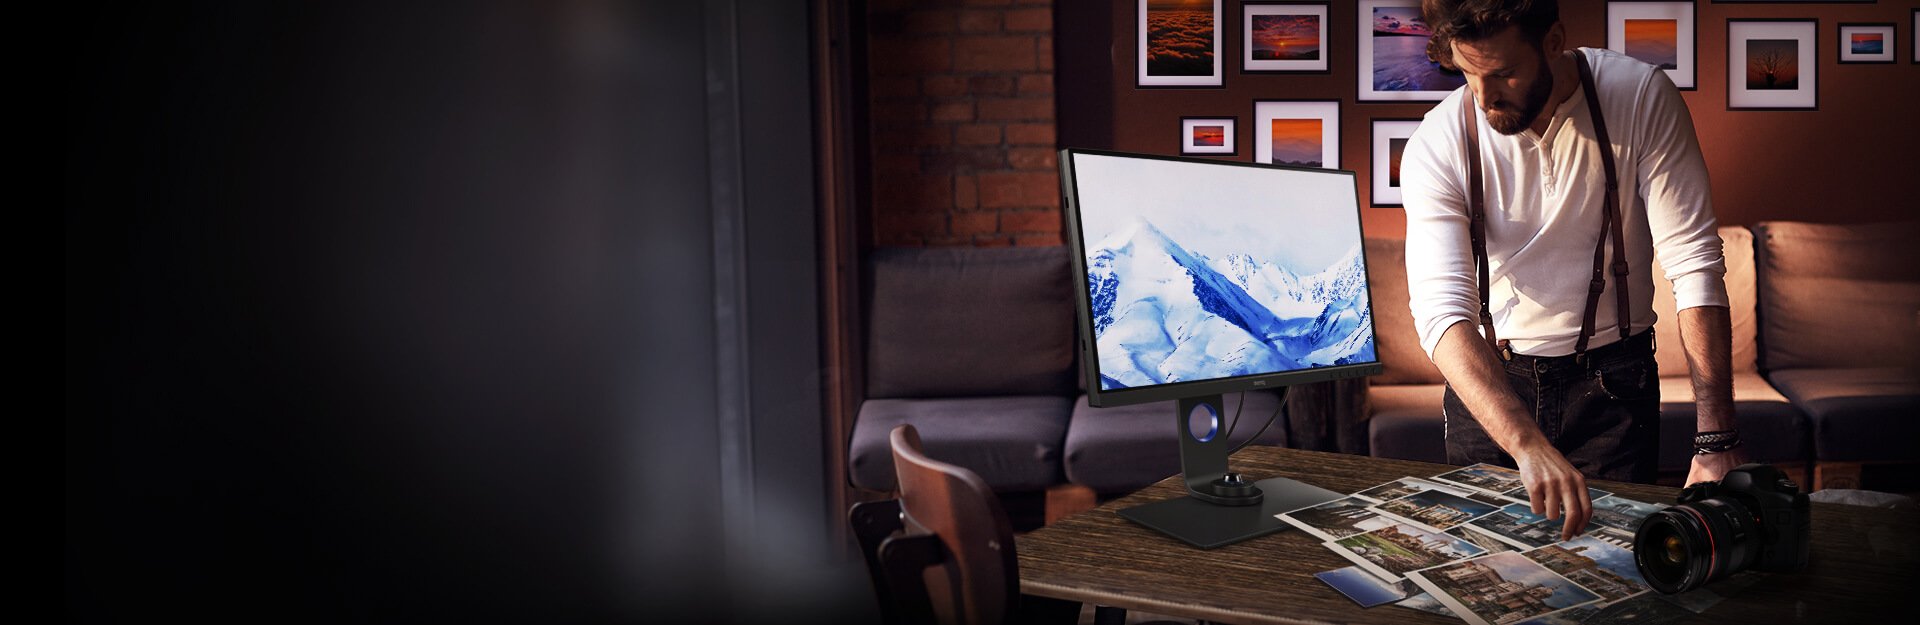 benq has dedicated itself to achieving the highest level of color accuracy in every detail